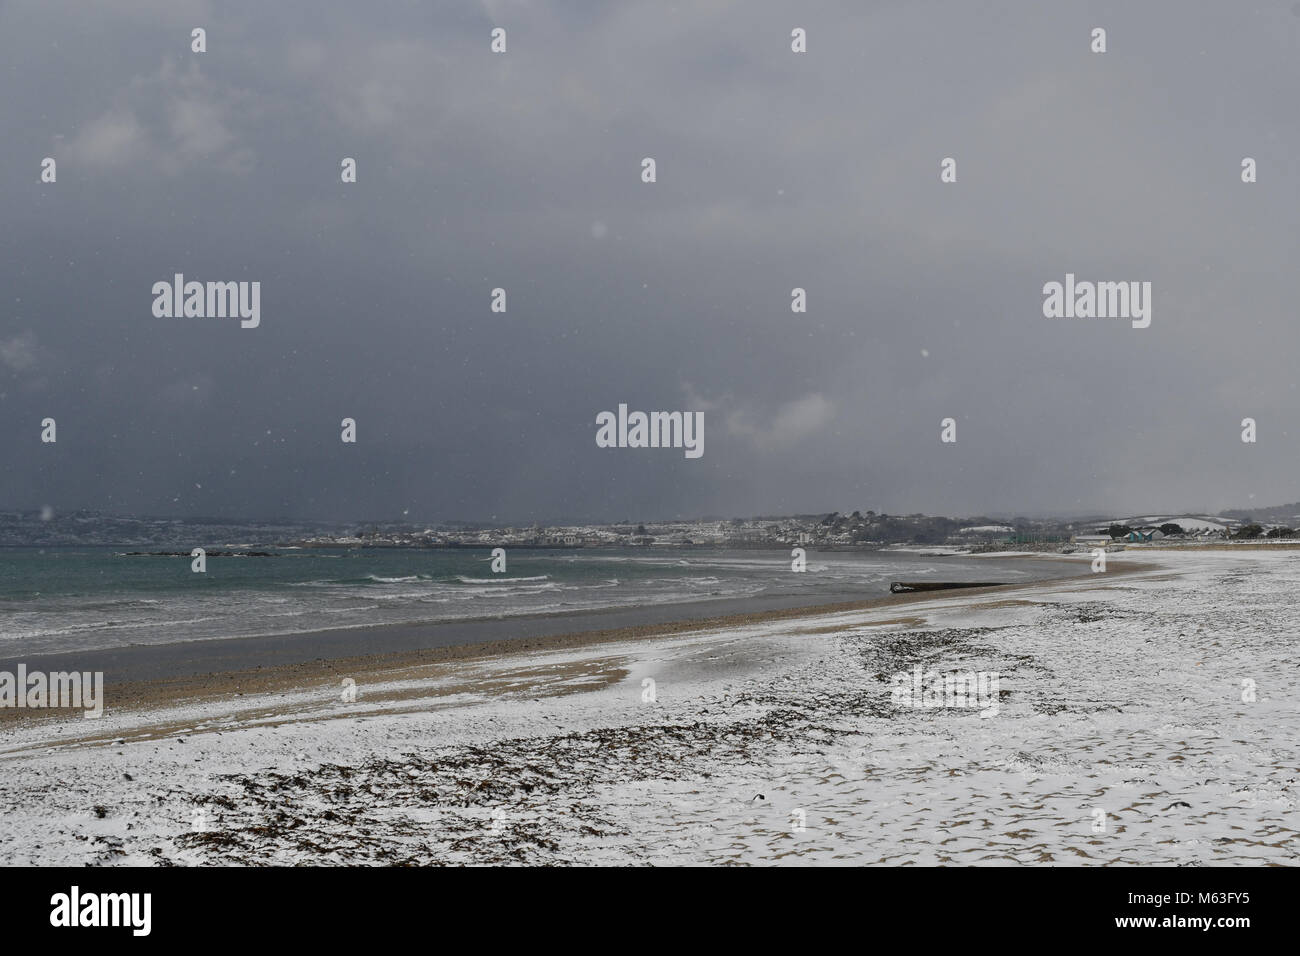 Marazion, Corwall, UK, 28th Feb 2018. UK Weather. Snow on the beach on St Michaels Mount and the beach at Marazion, as the beast from the east hits Cornwall. Credit: Simon Maycock/Alamy Live News Stock Photo